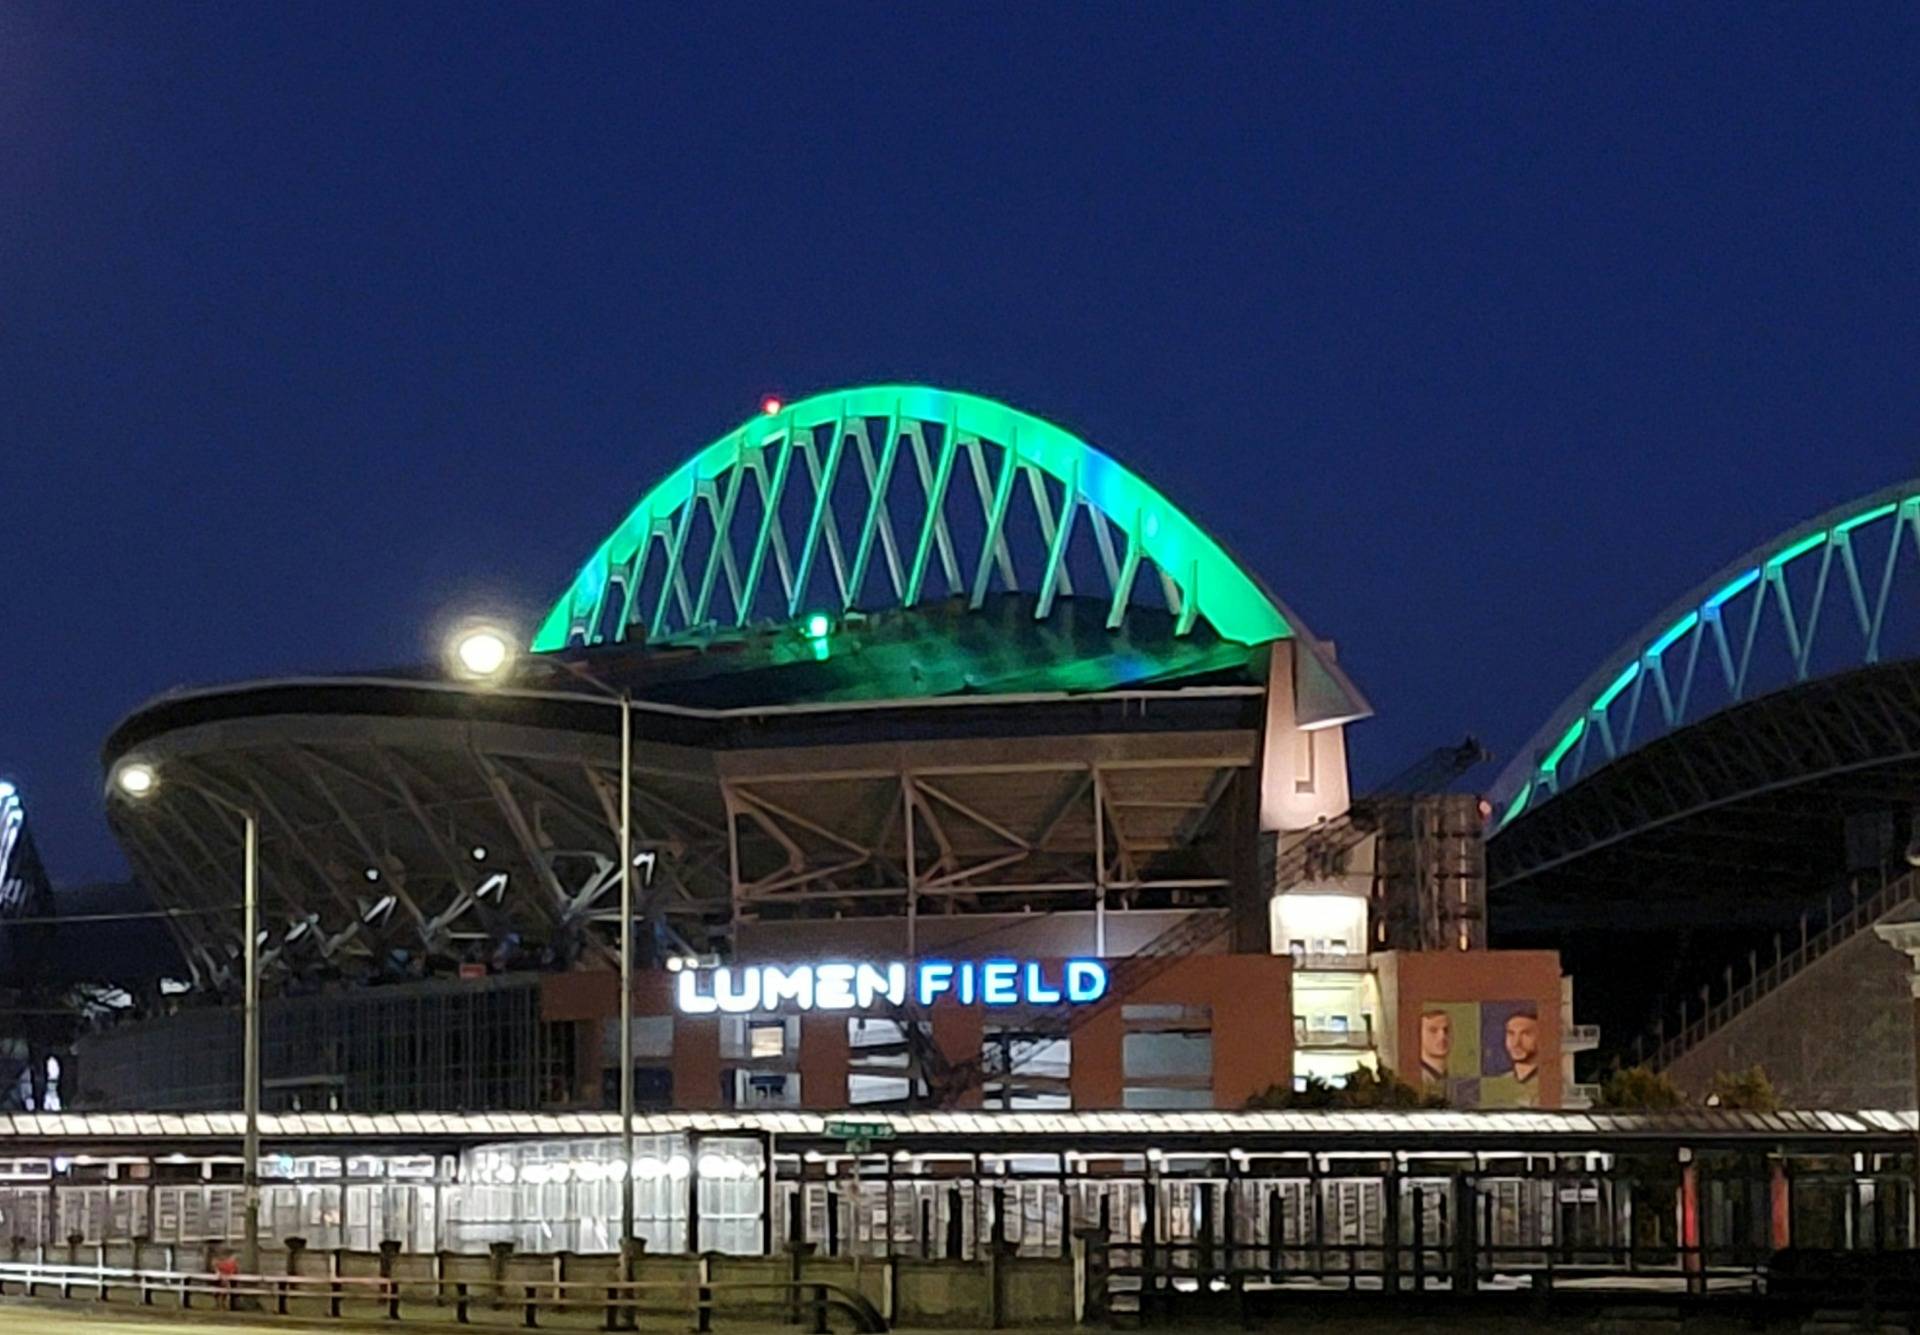 Home of the Seattle Seahawks football team